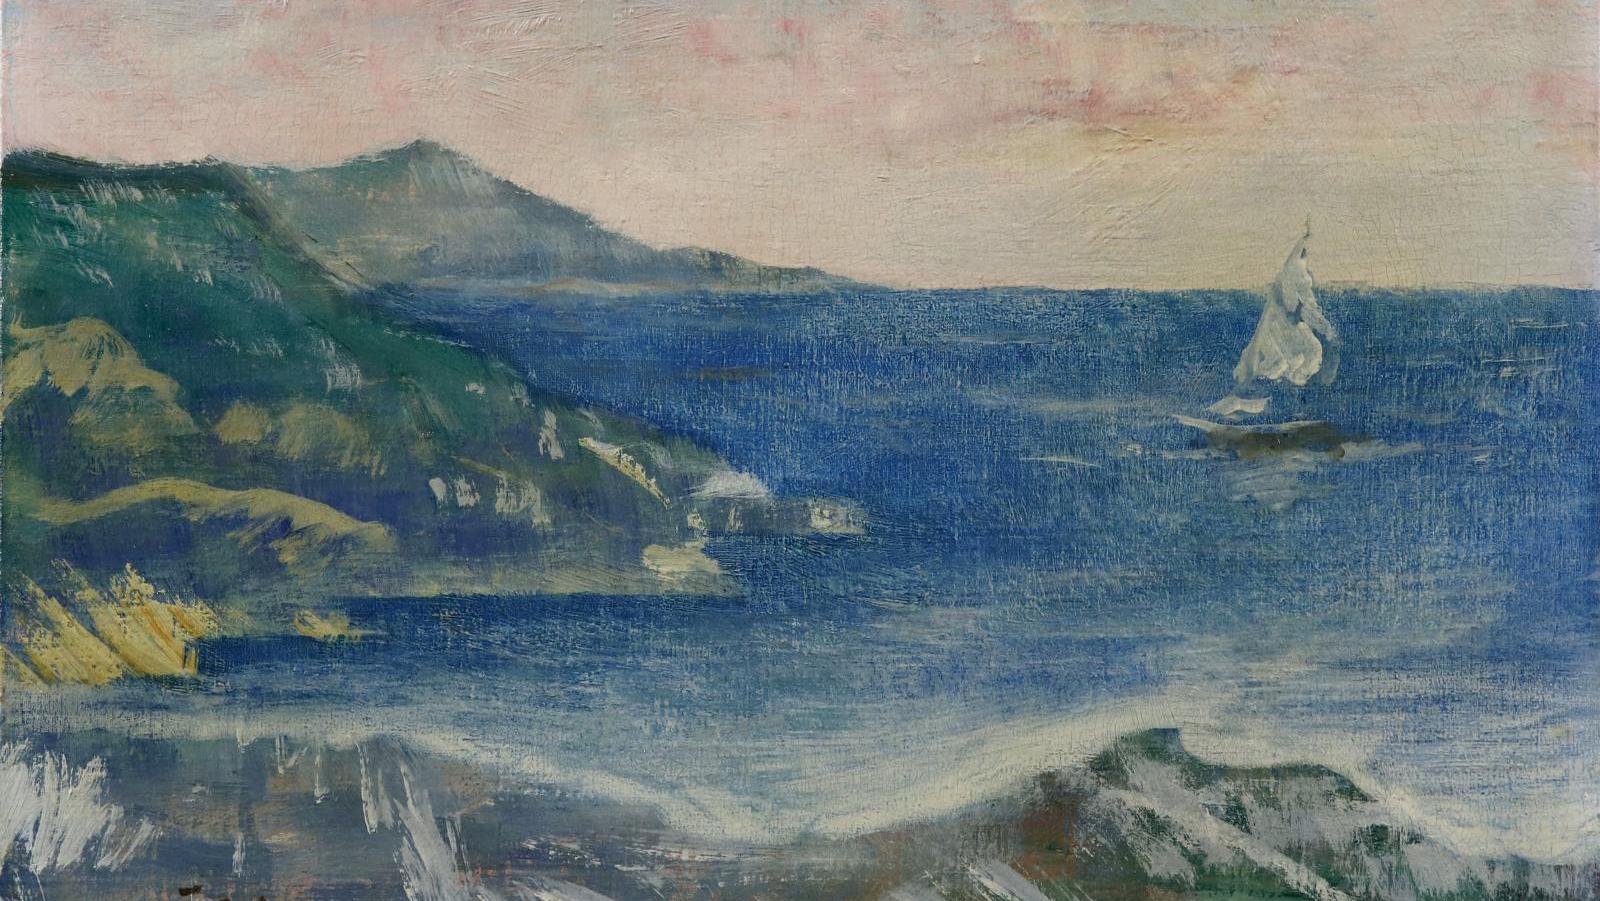 Carlo Carrà (1881-1966), Marine avec voilier (Seascape with Sailboat), 1944, oil... Painting for the Future with a Late Work by Carlo Carrà